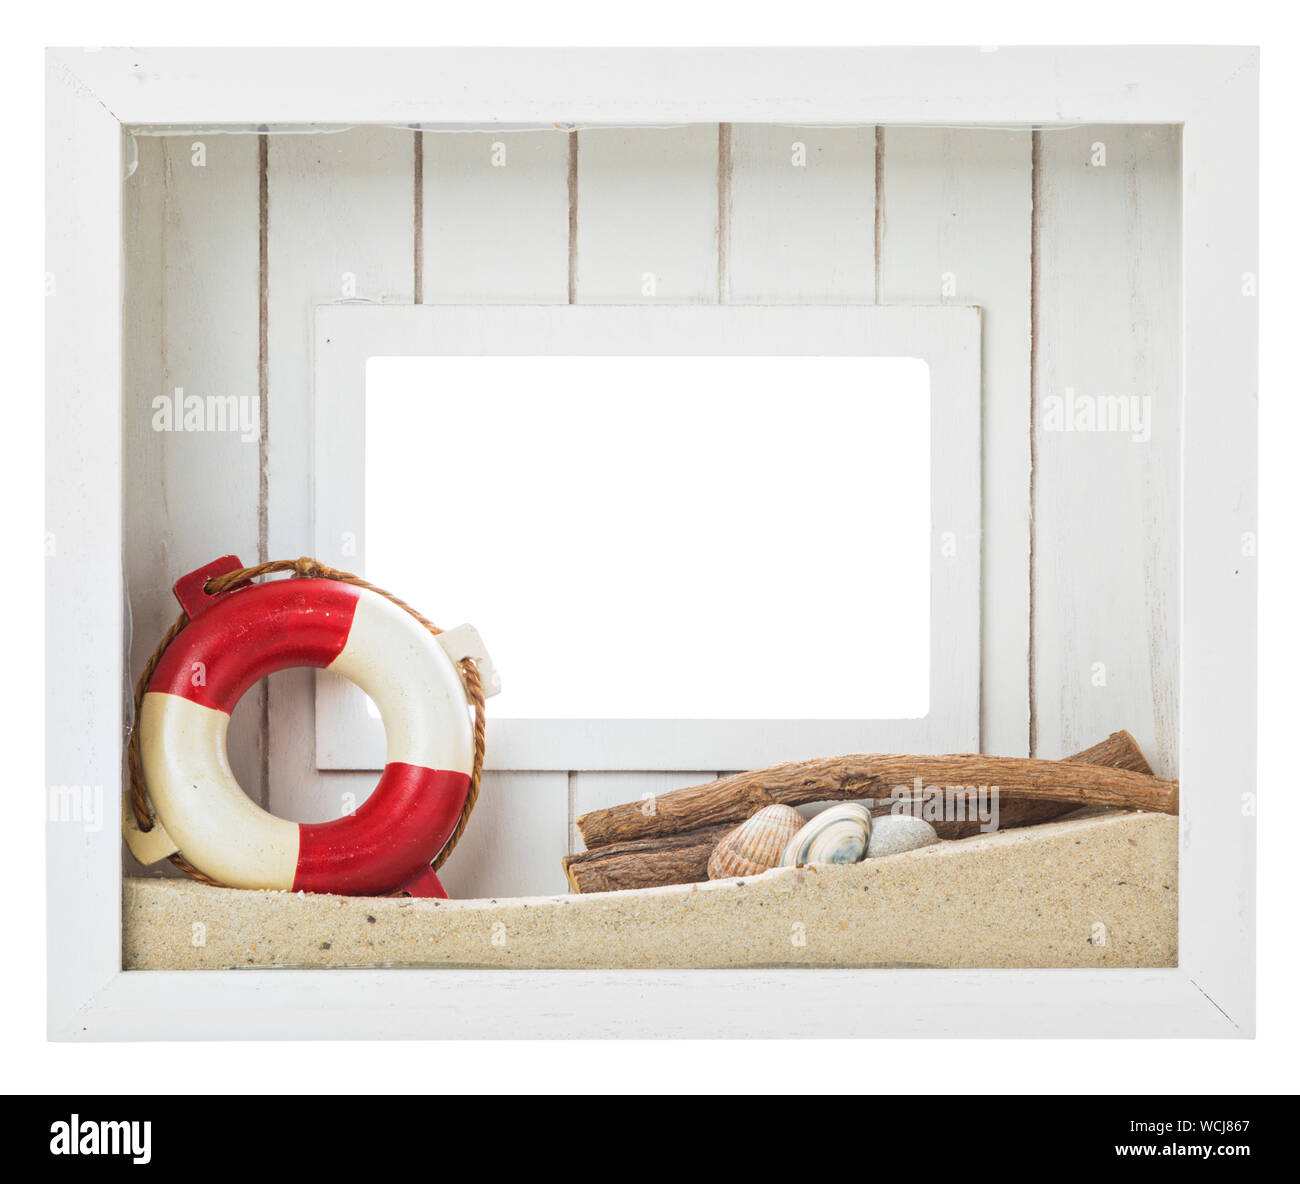 Rustic white picture frame decorated with sand, sea shells, driftwood and life belt. Isolated with clipping path on white background. Stock Photo